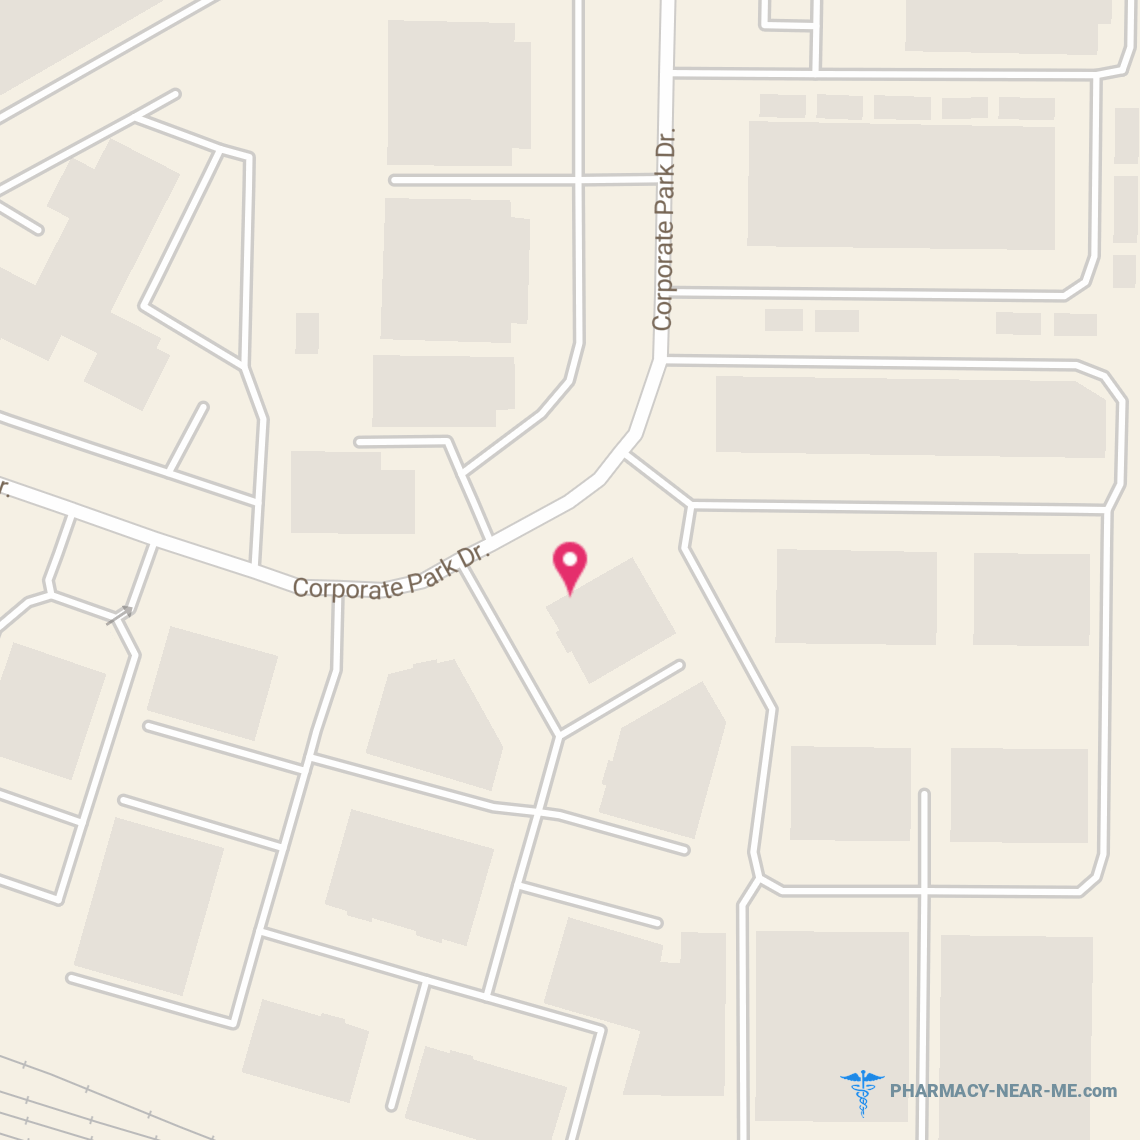 MDRX, LLC - Pharmacy Hours, Phone, Reviews & Information: 118 Corporate Park Drive, Henderson, Nevada 89074, United States